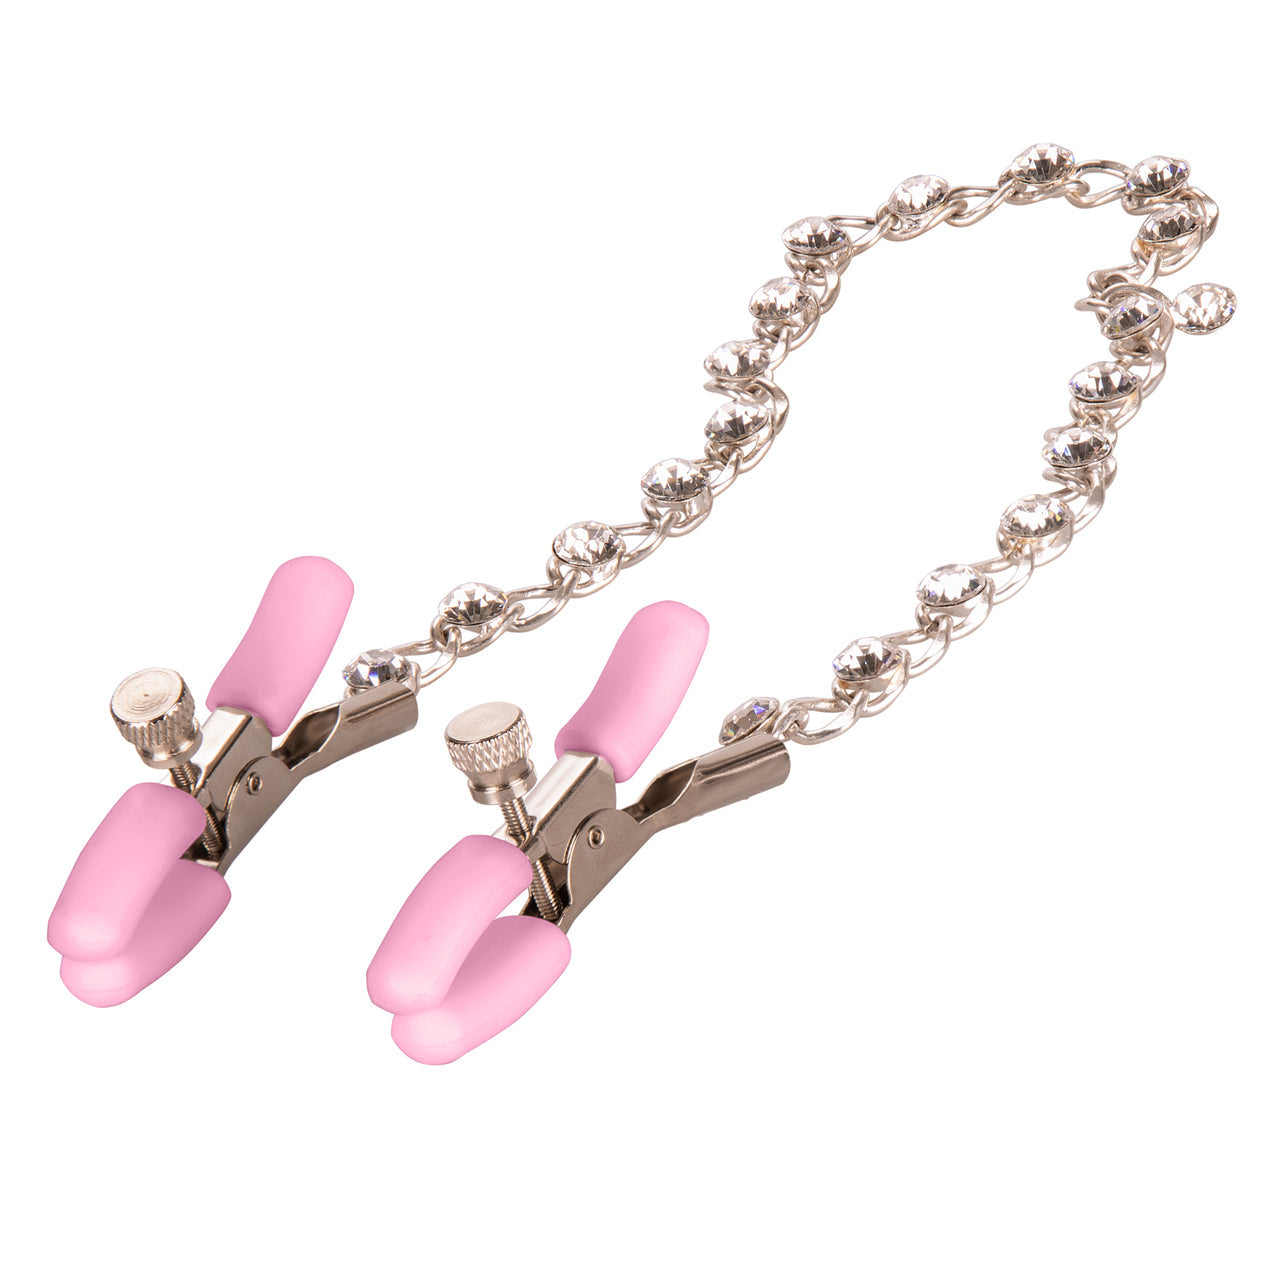 Nipple Play Crystal Chain Nipple Clamps - Pink - Thorn & Feather Sex Toy Canada